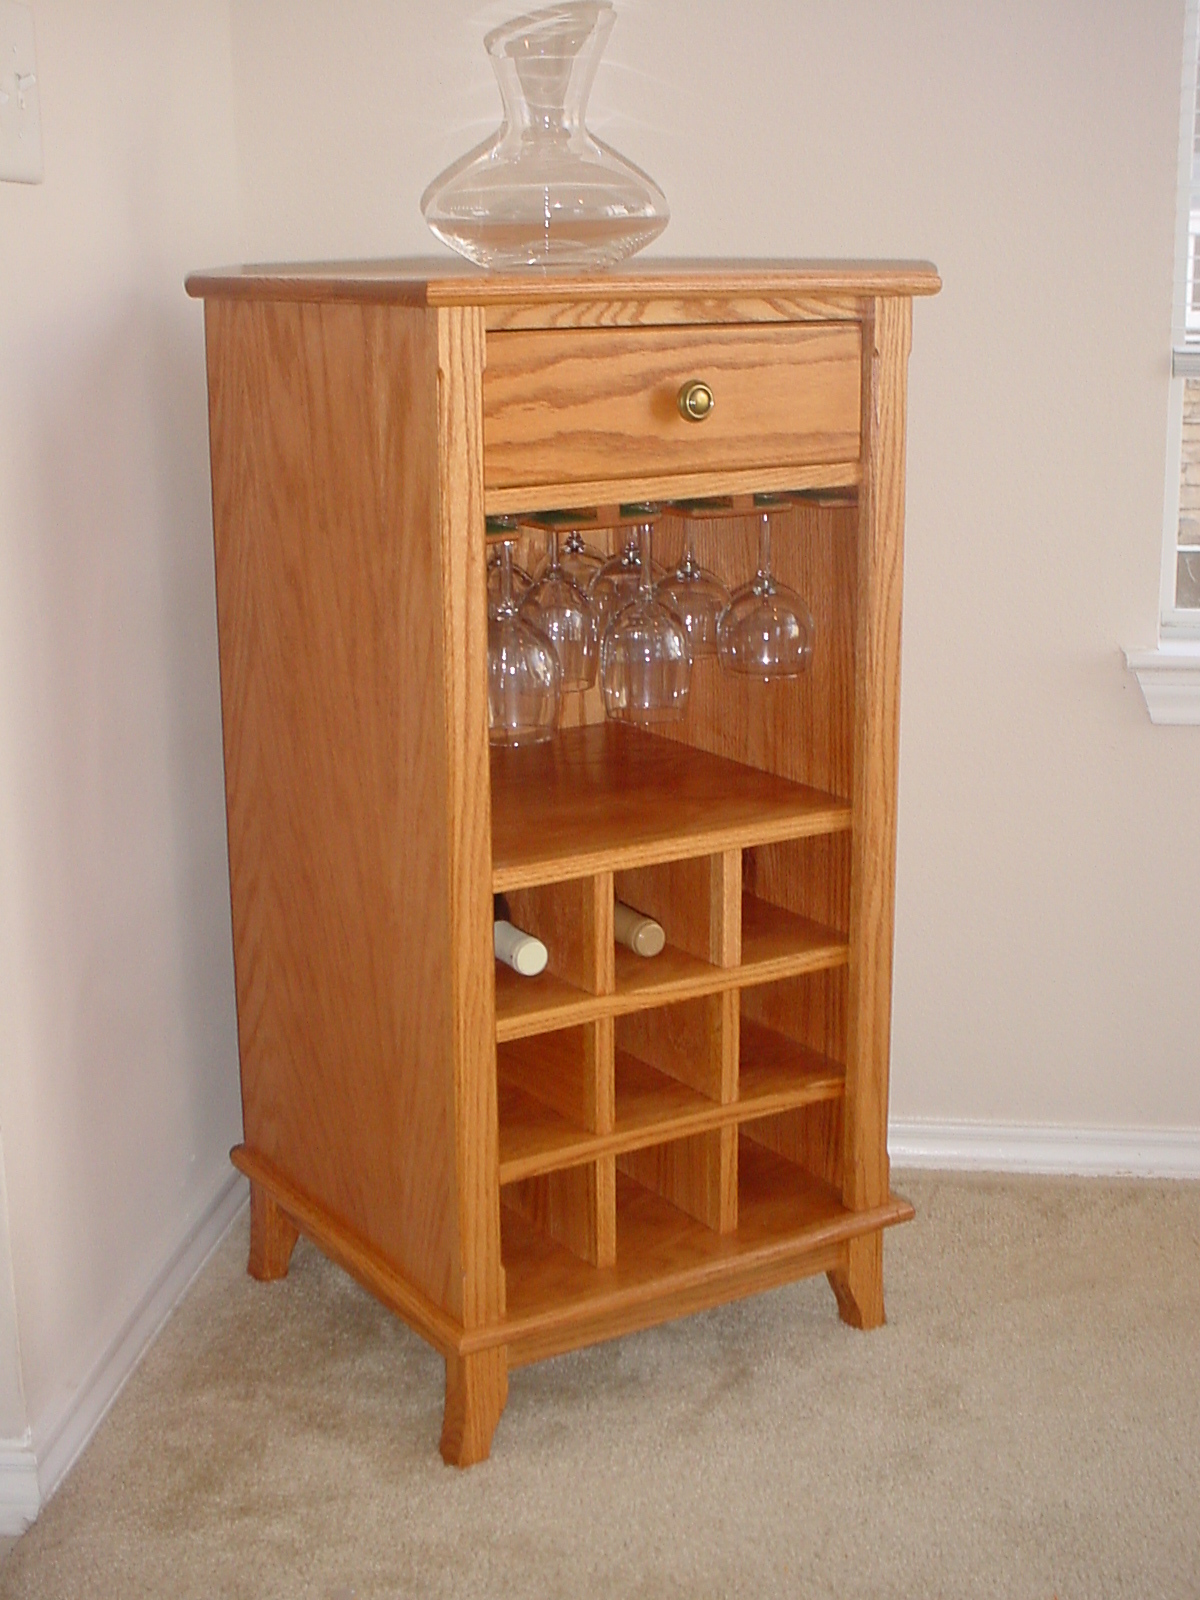 14.) Completed Wine Rack